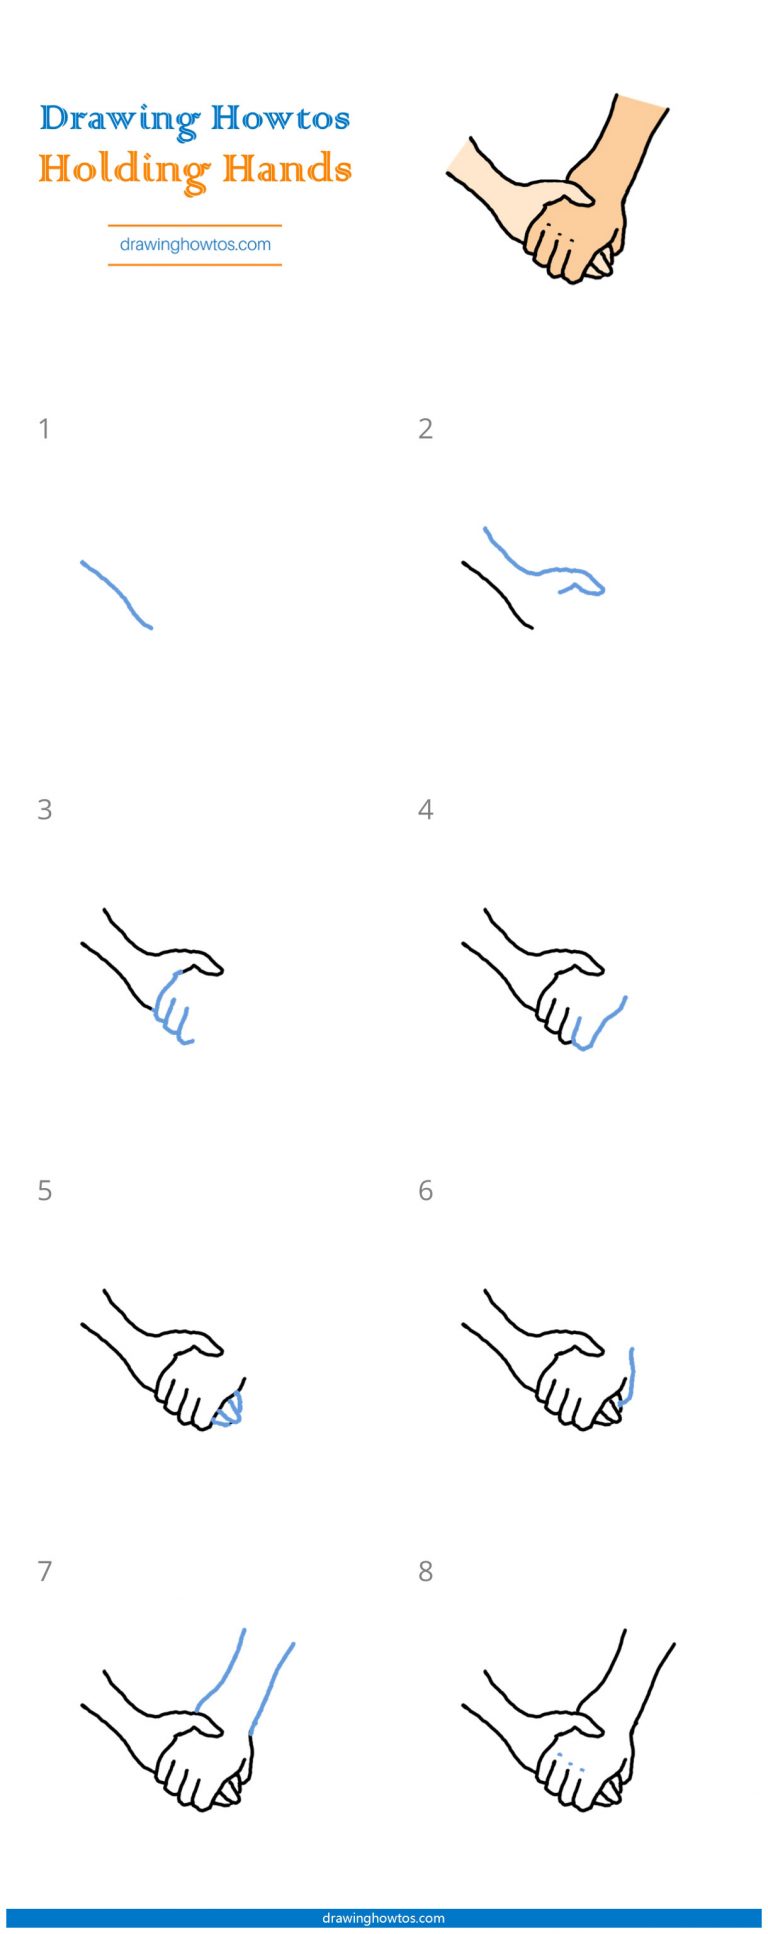 How to Draw Holding Hands - Step by Step Easy Drawing Guides - Drawing